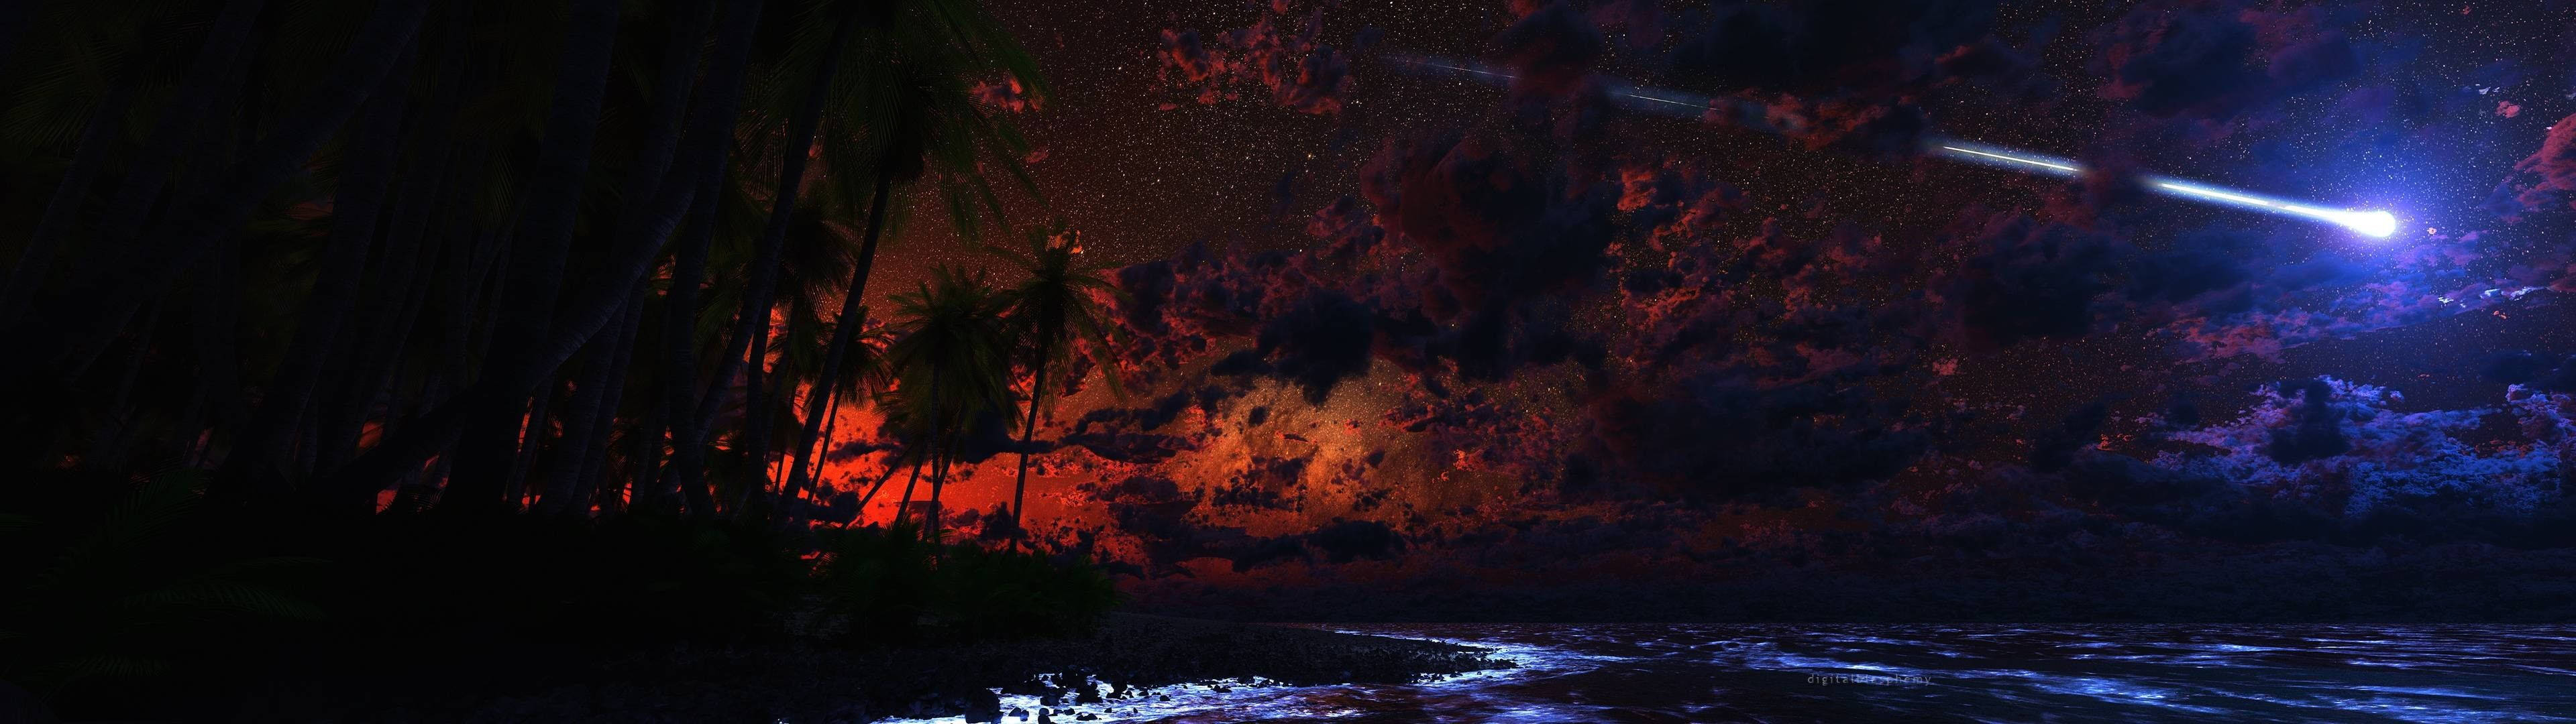 3840x1080 4k Comet And Beach Background